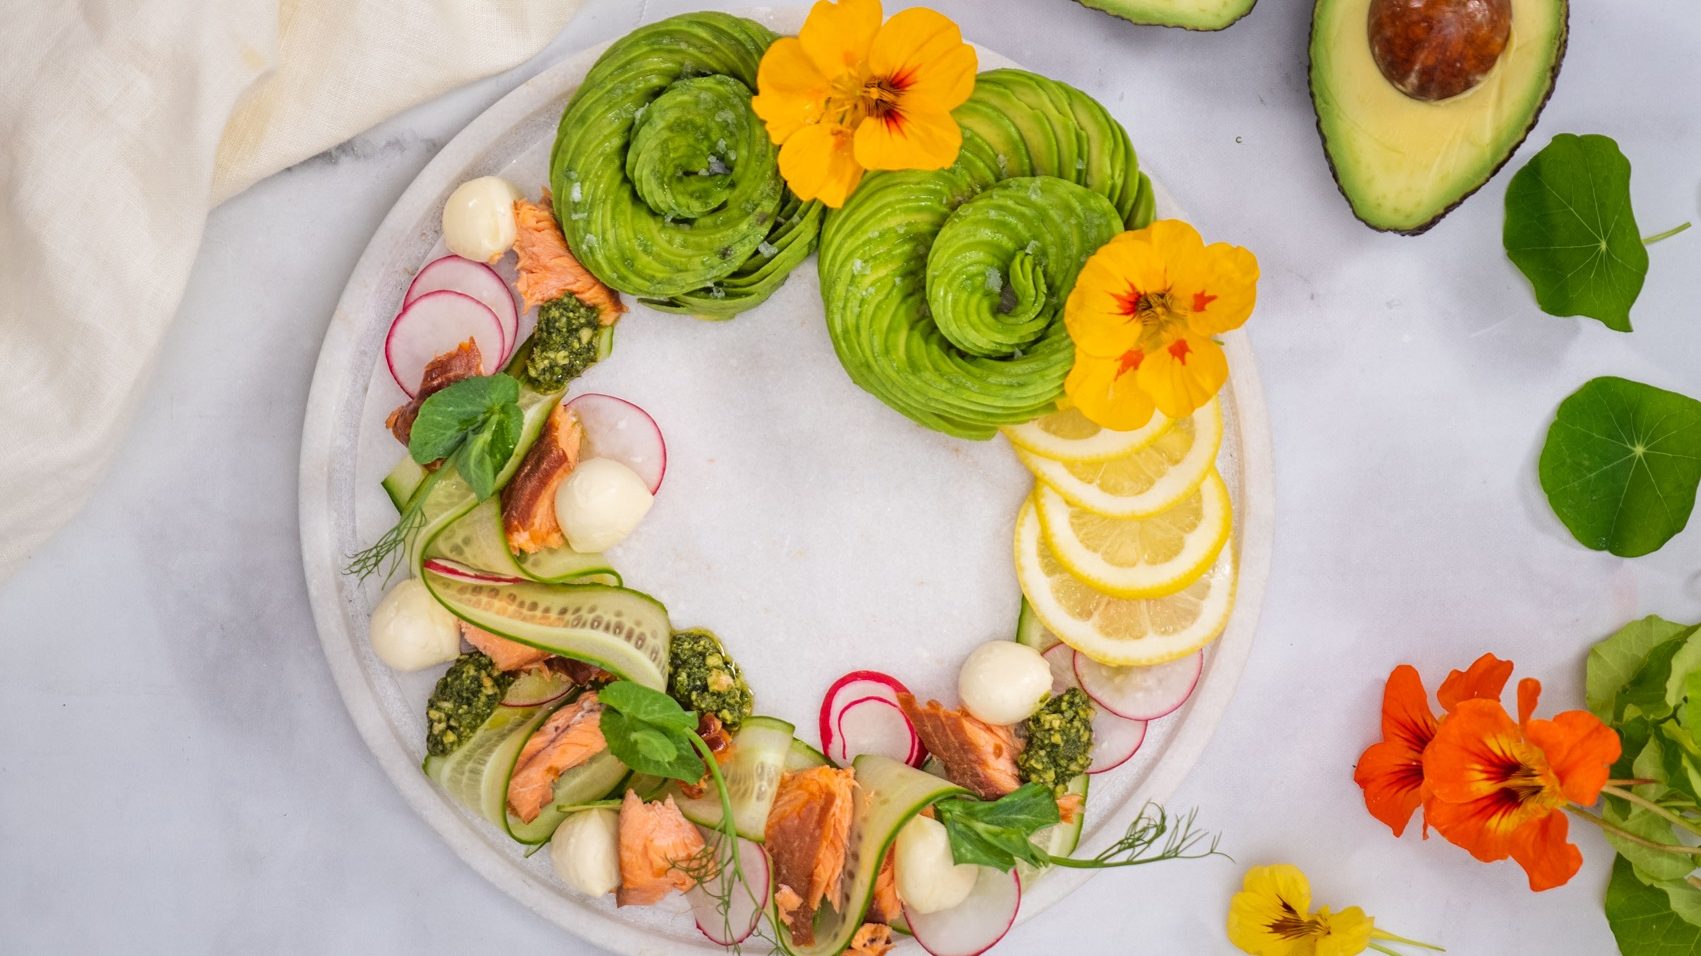 Smoked salmon wreath with highly decorative accents of edible flowers, lemon slices, fresh herbs and avocado slice spirals.